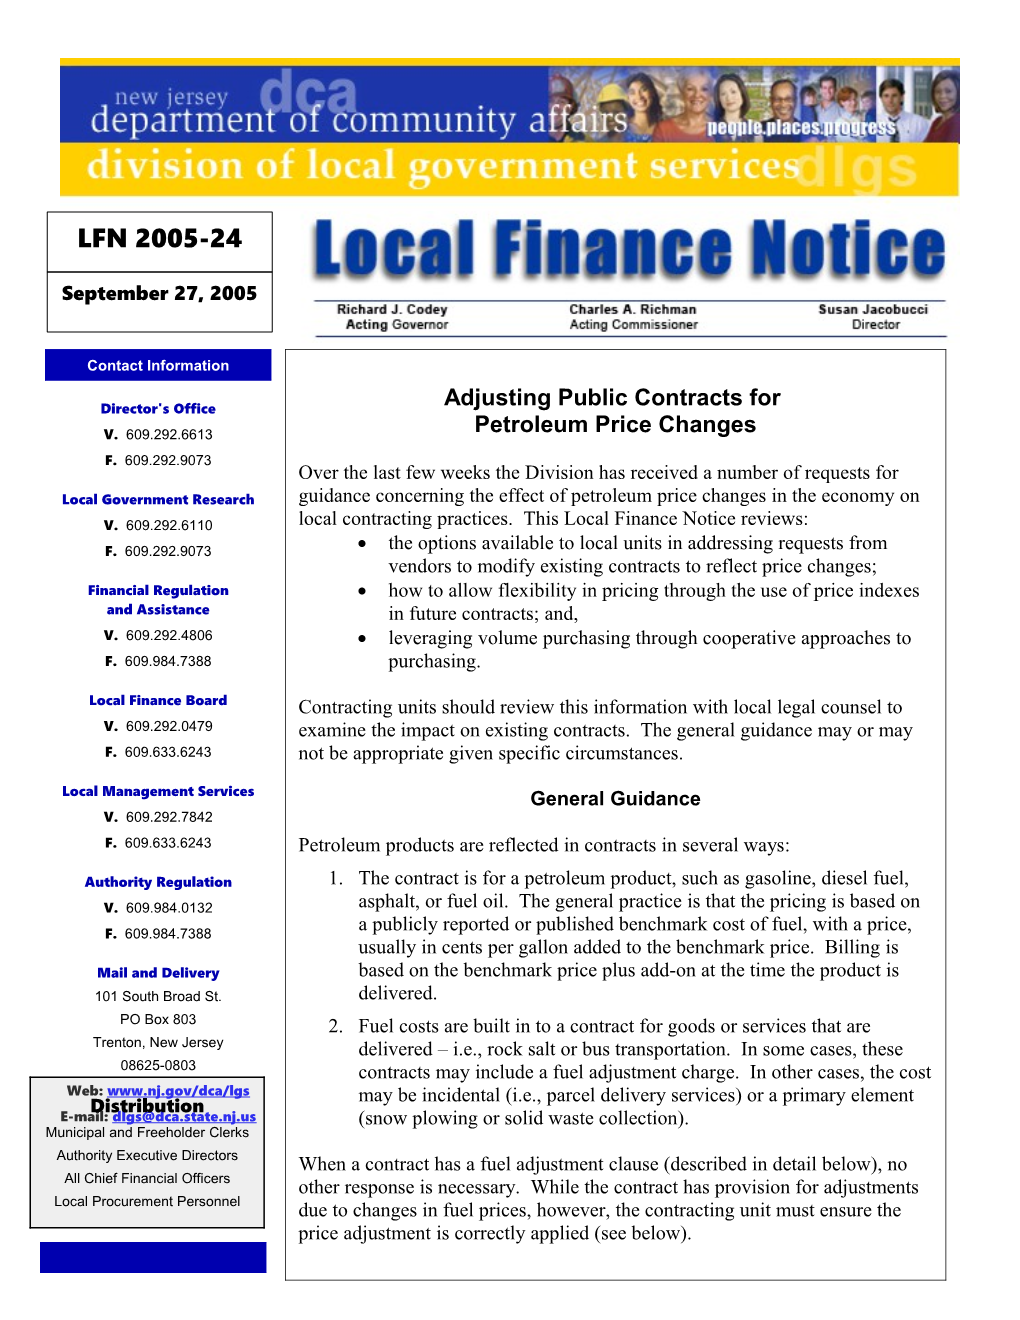 Local Finance Notice 2005-24September 27, 2005Page 1